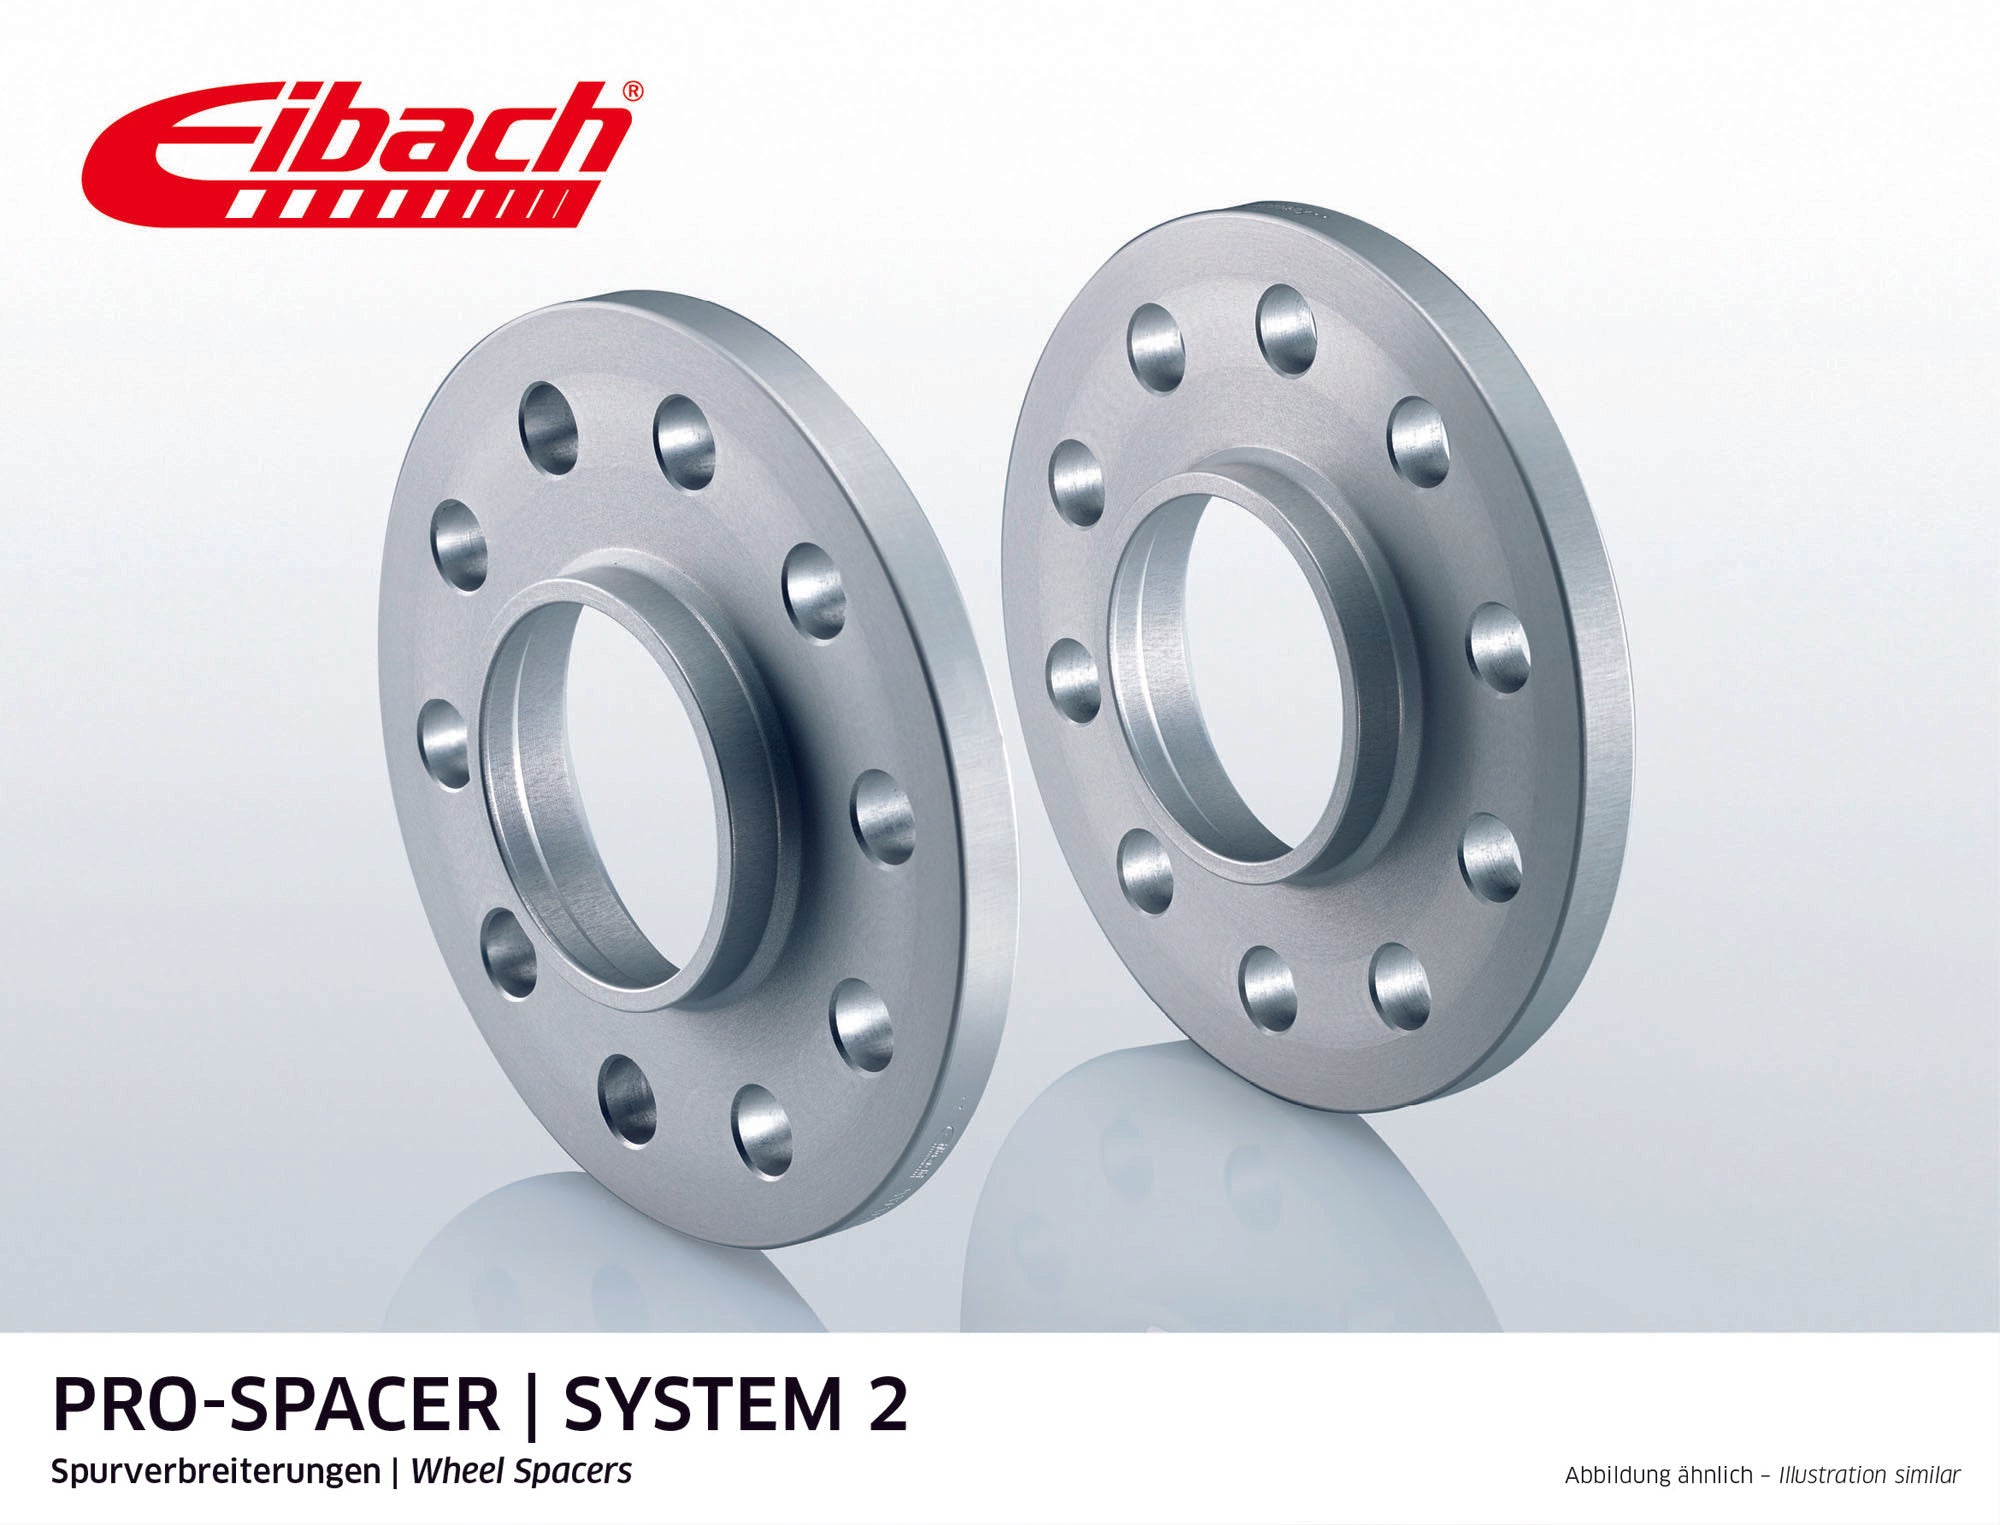 Eibach 15mm Pro-Spacer - Silver Anodized Wheel Spacer 911 2004-12 #S90-2-15-018